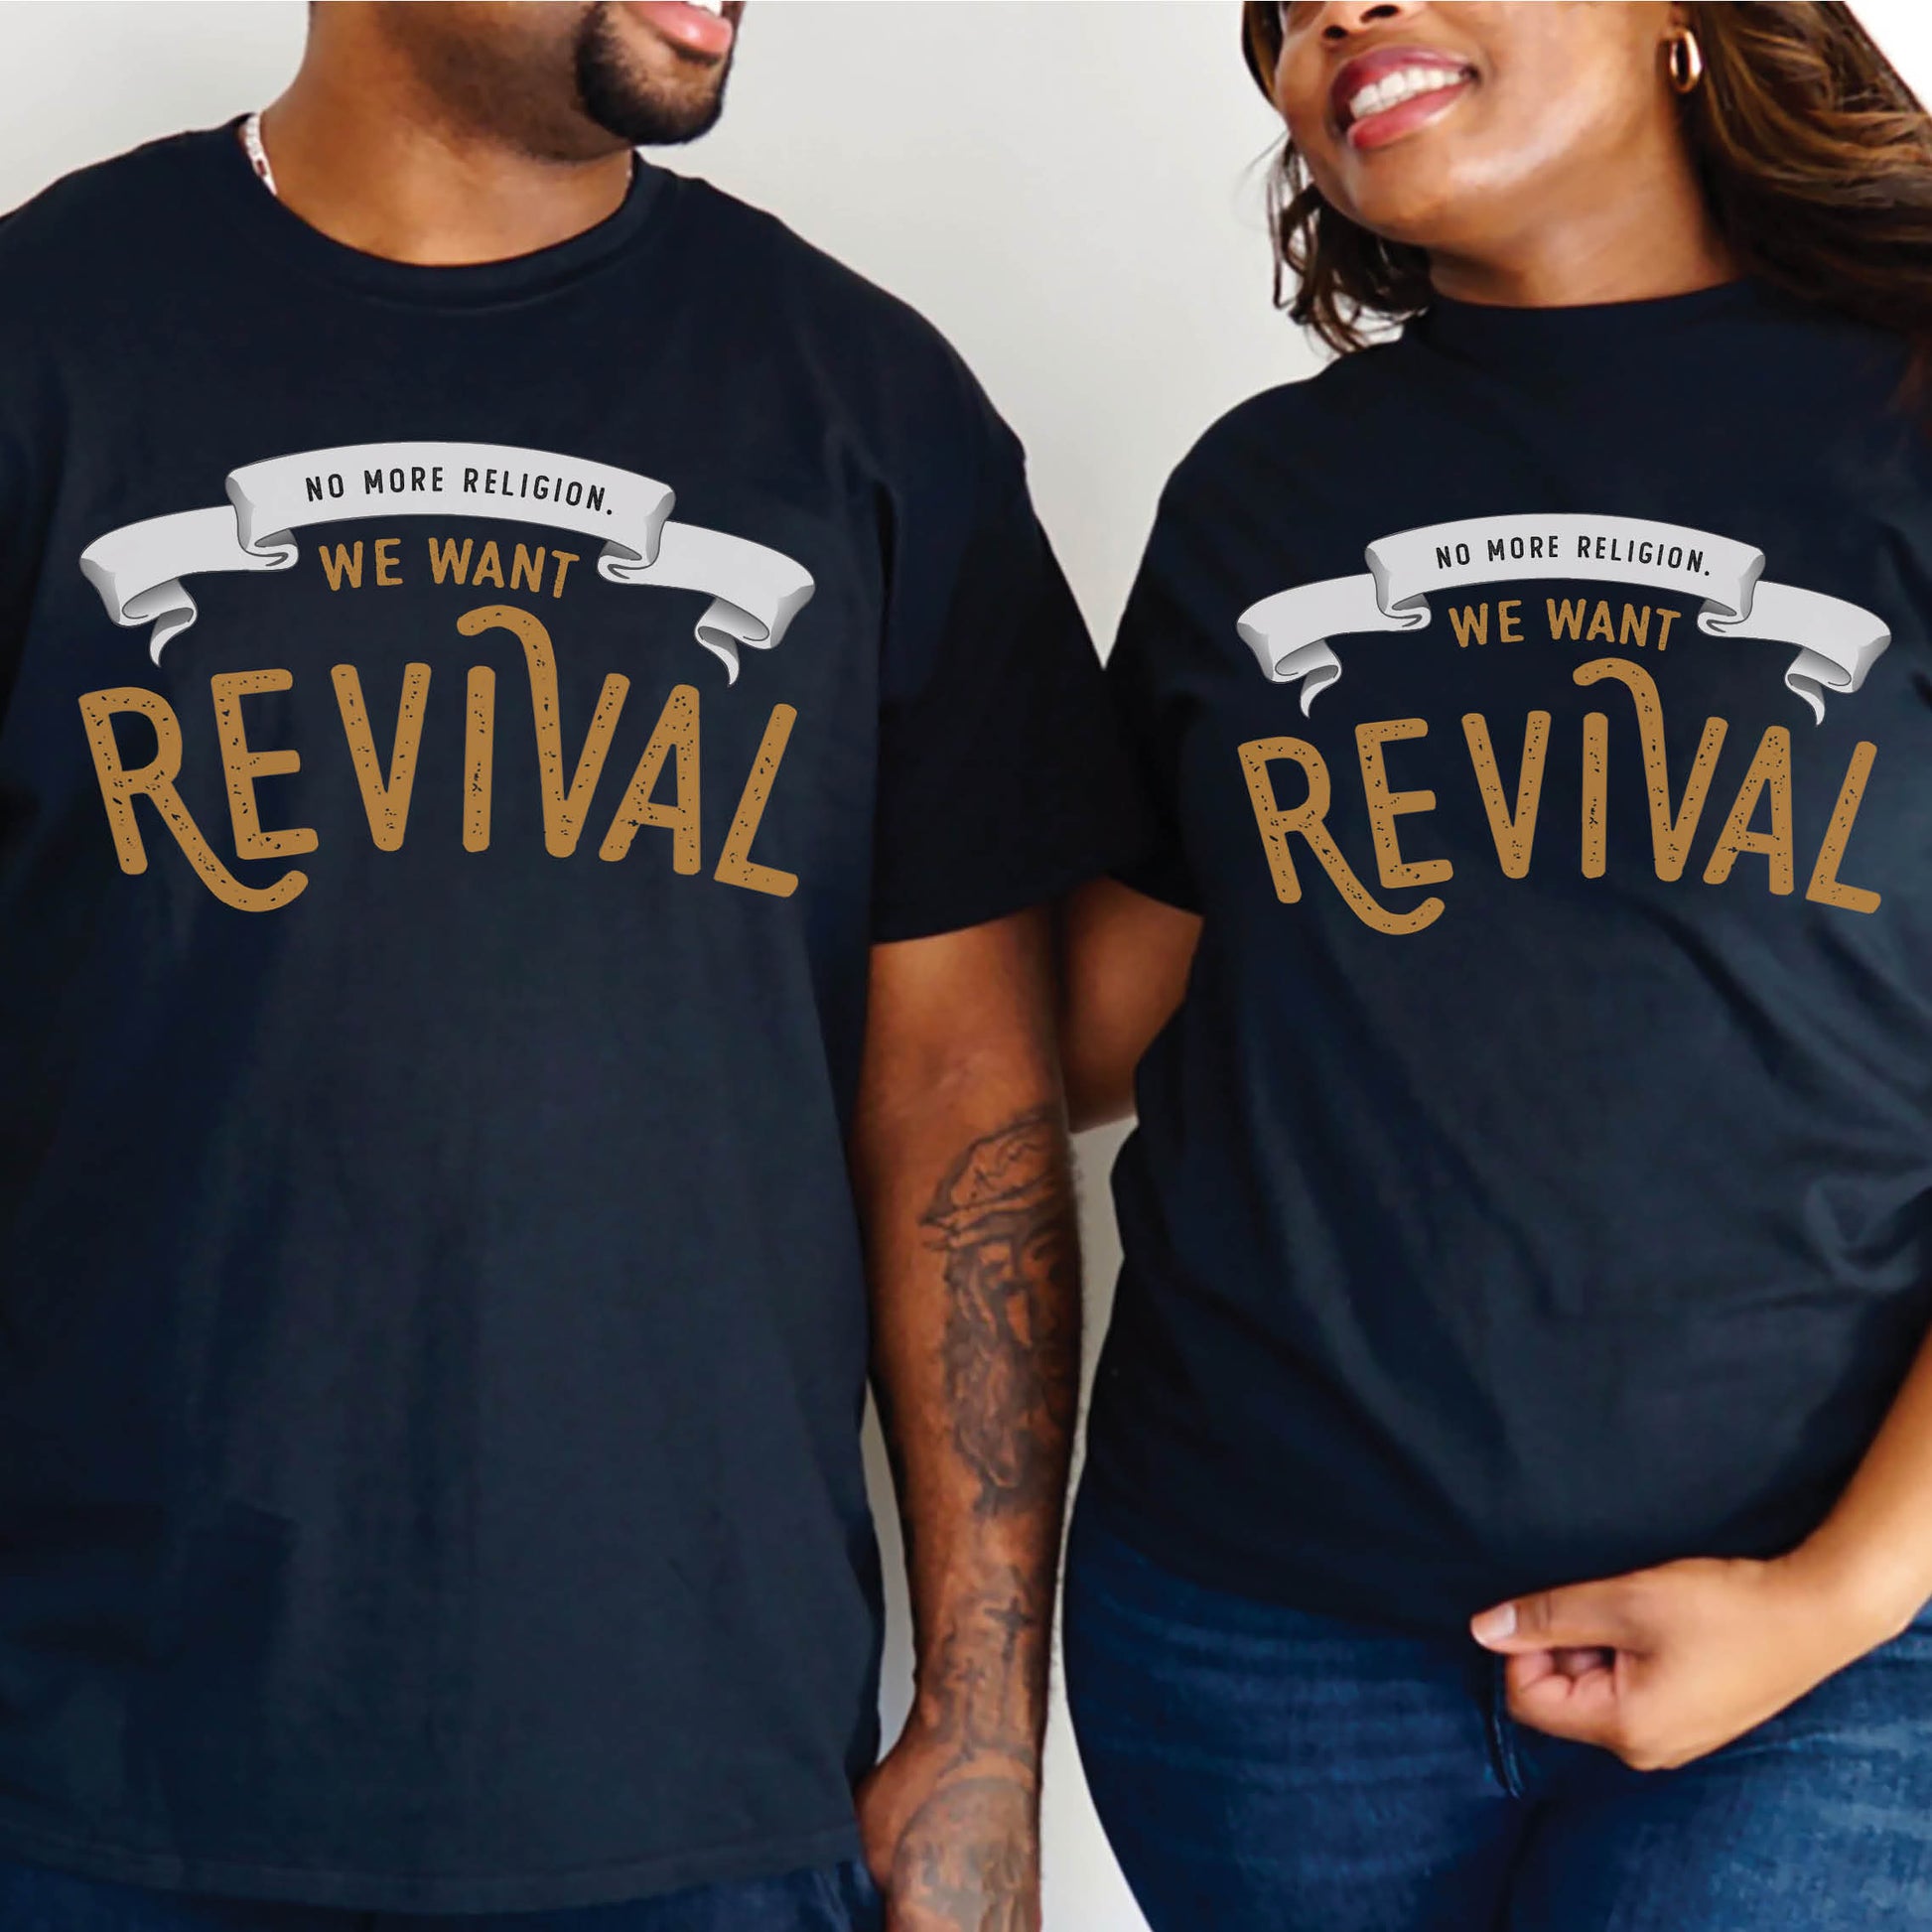 Black Jesus Christian aesthetic soft Unisex T-shirt that says, No More Religion We Want Revival printed in gold and white, church gift couple graphic tees designed for men and women 